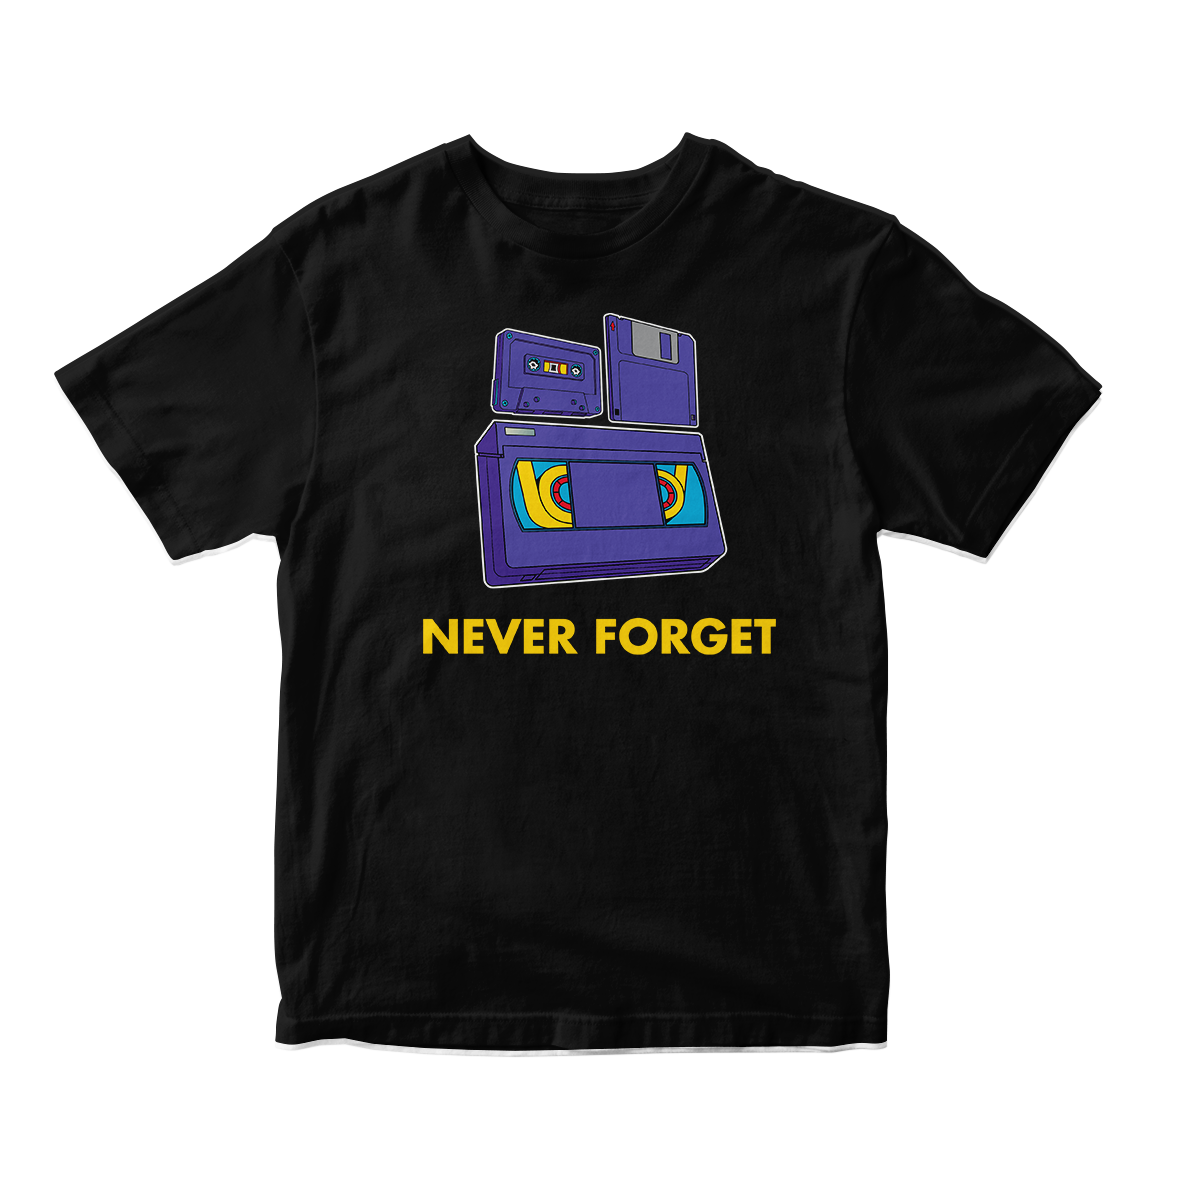 Never Forget in White Aqua CW Short Sleeve Tee